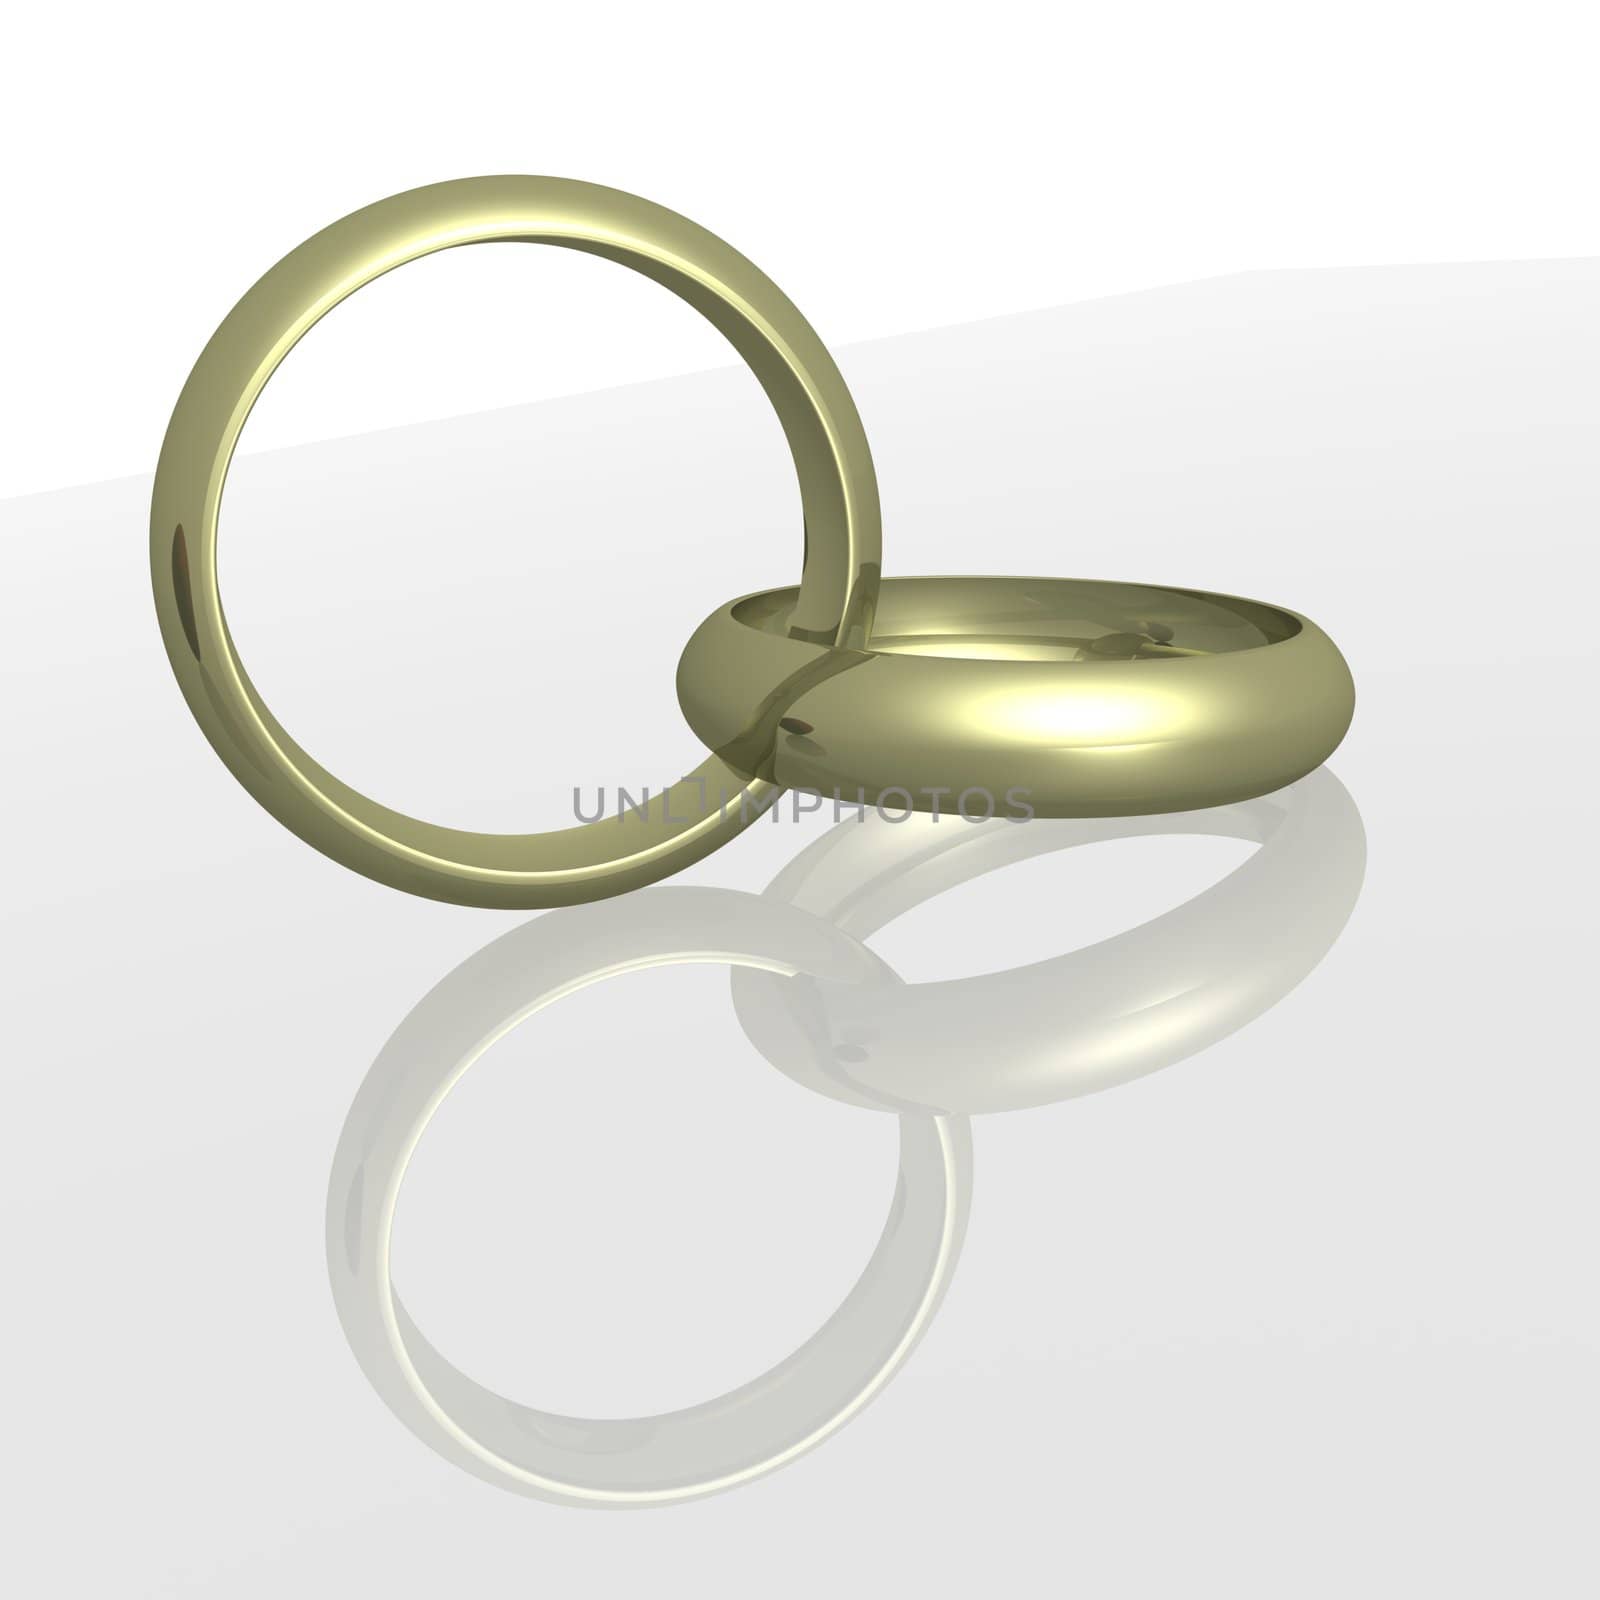 Two wedding rings with reflection. the 3D image.